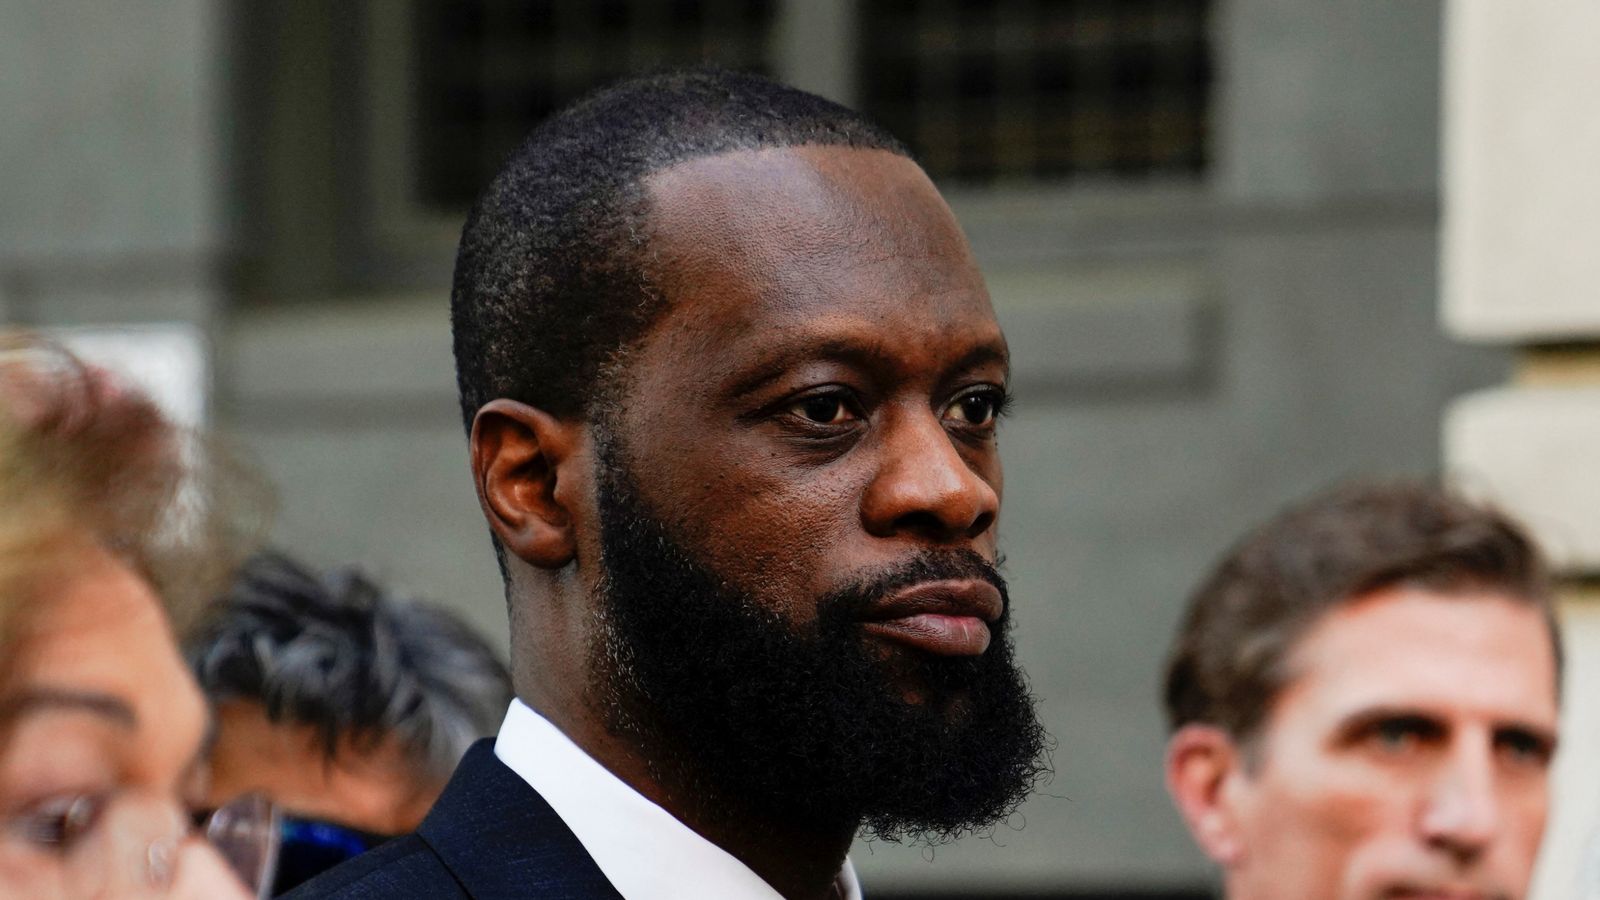 Fugees rapper Pras Michel found guilty of political conspiracy